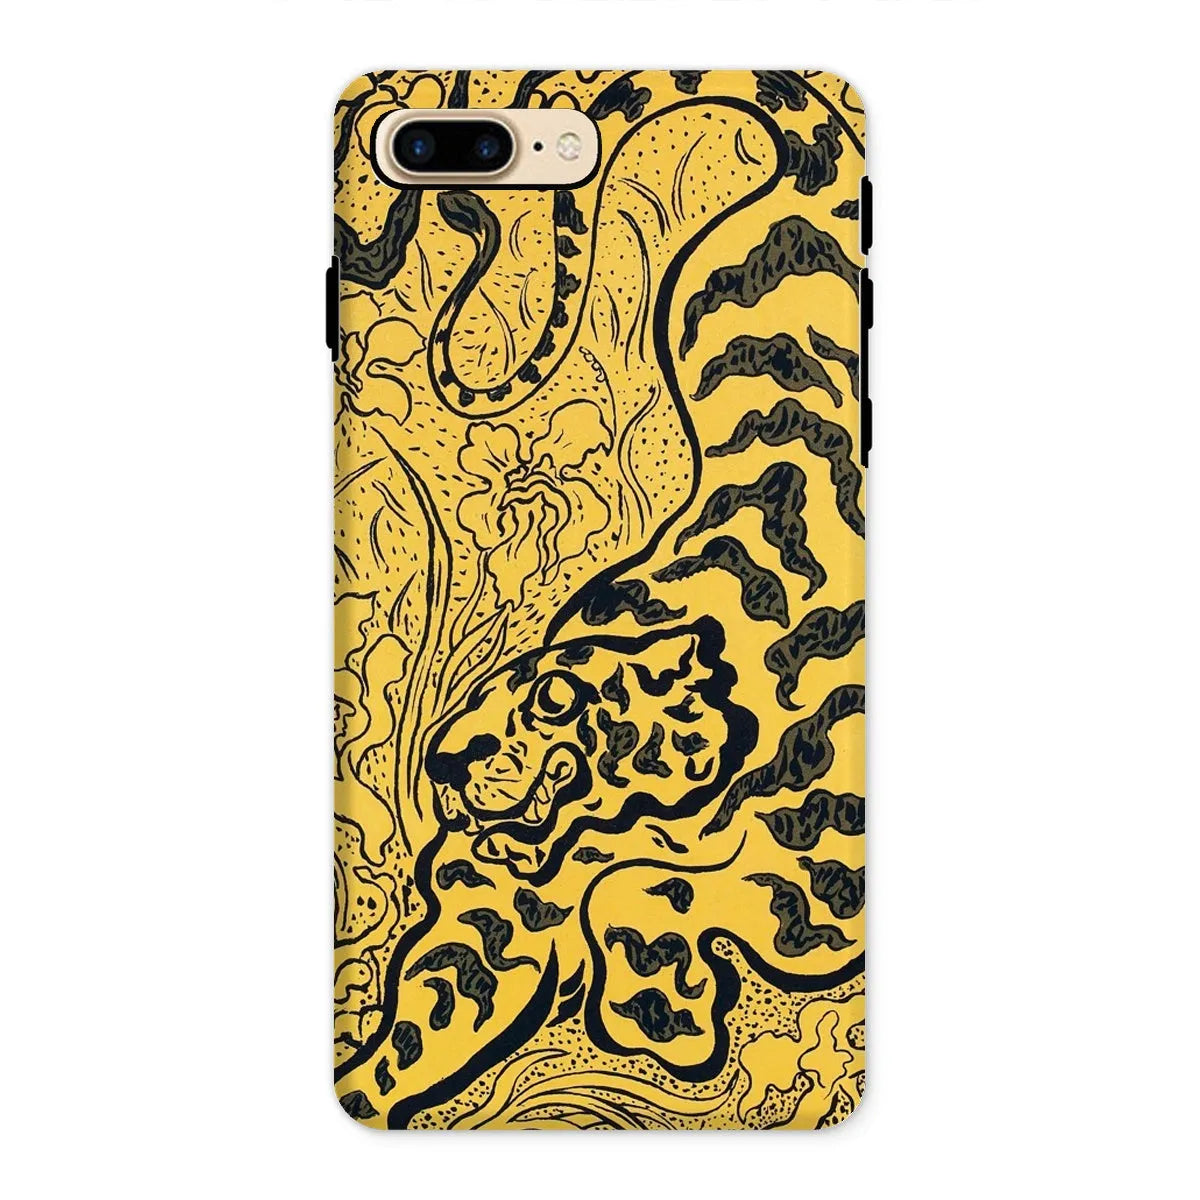 Tiger In The Jungle - Graphic Art Phone Case - Paul Ranson - Iphone 8 Plus / Matte - Mobile Phone Cases - Aesthetic Art